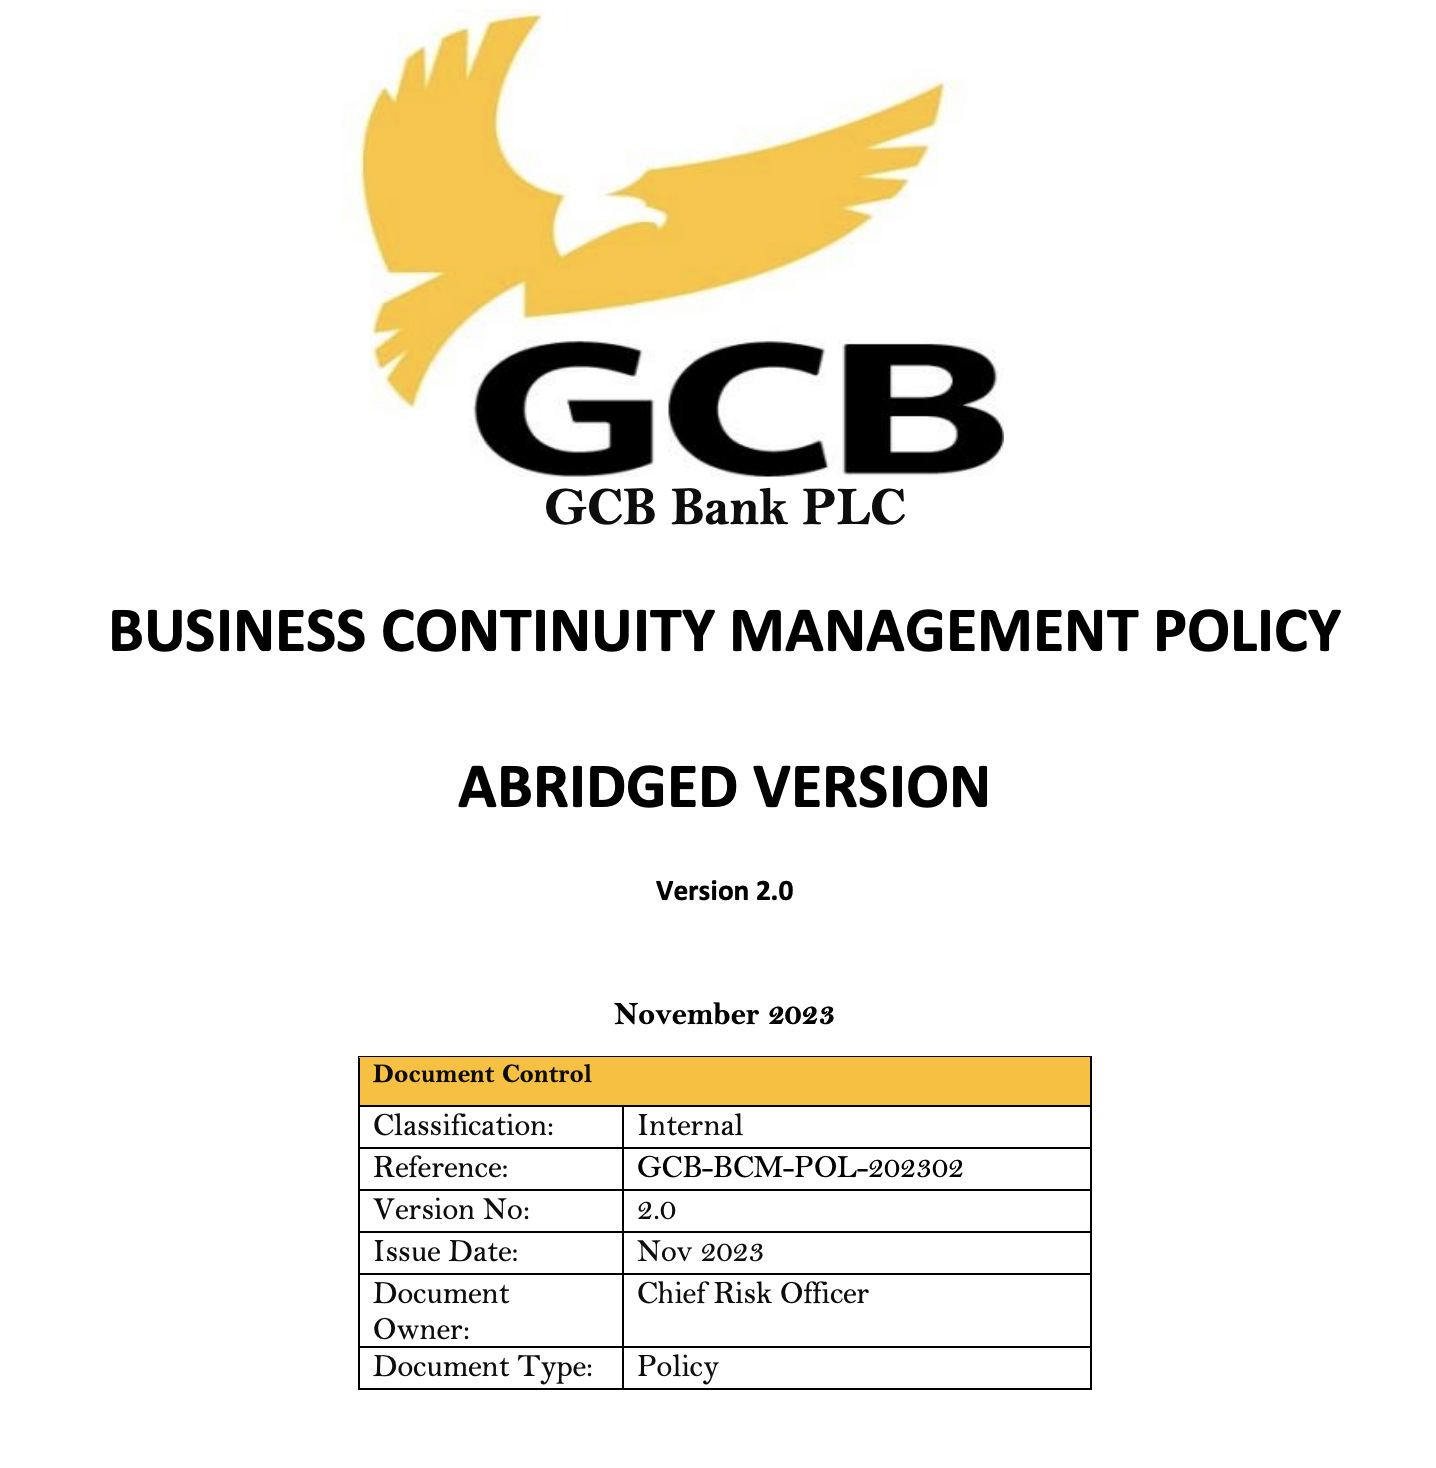 GCB Business Continuity Management Policy Abridged Version